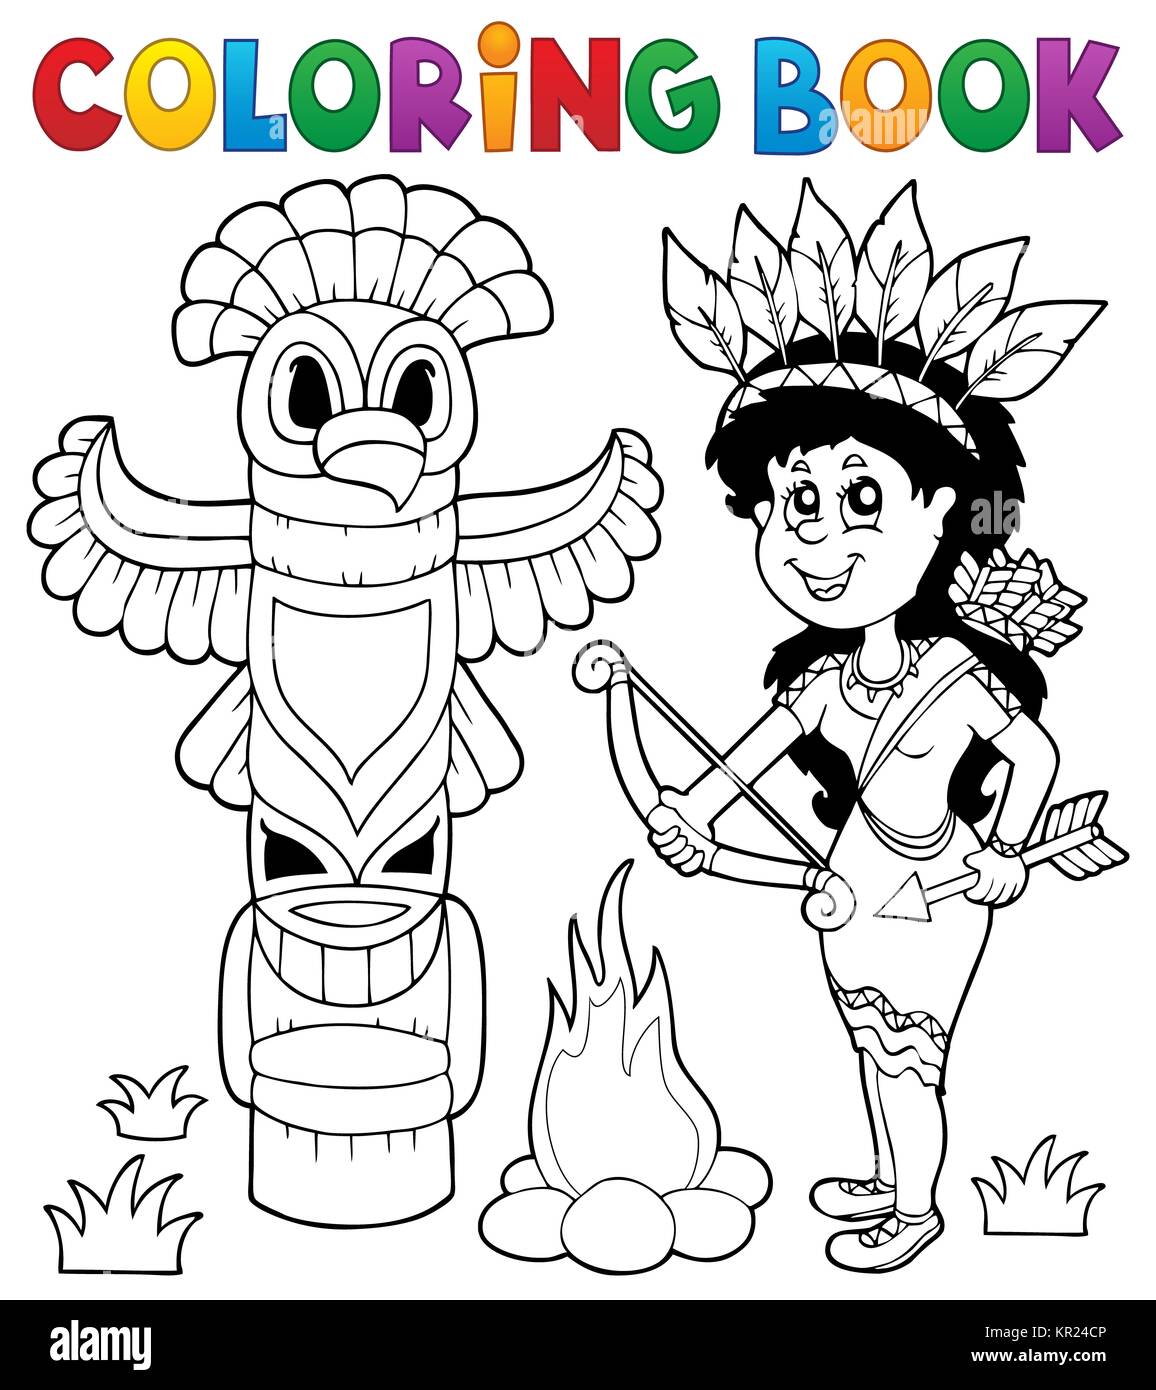 Coloring book Indian theme image 4 Stock Photo